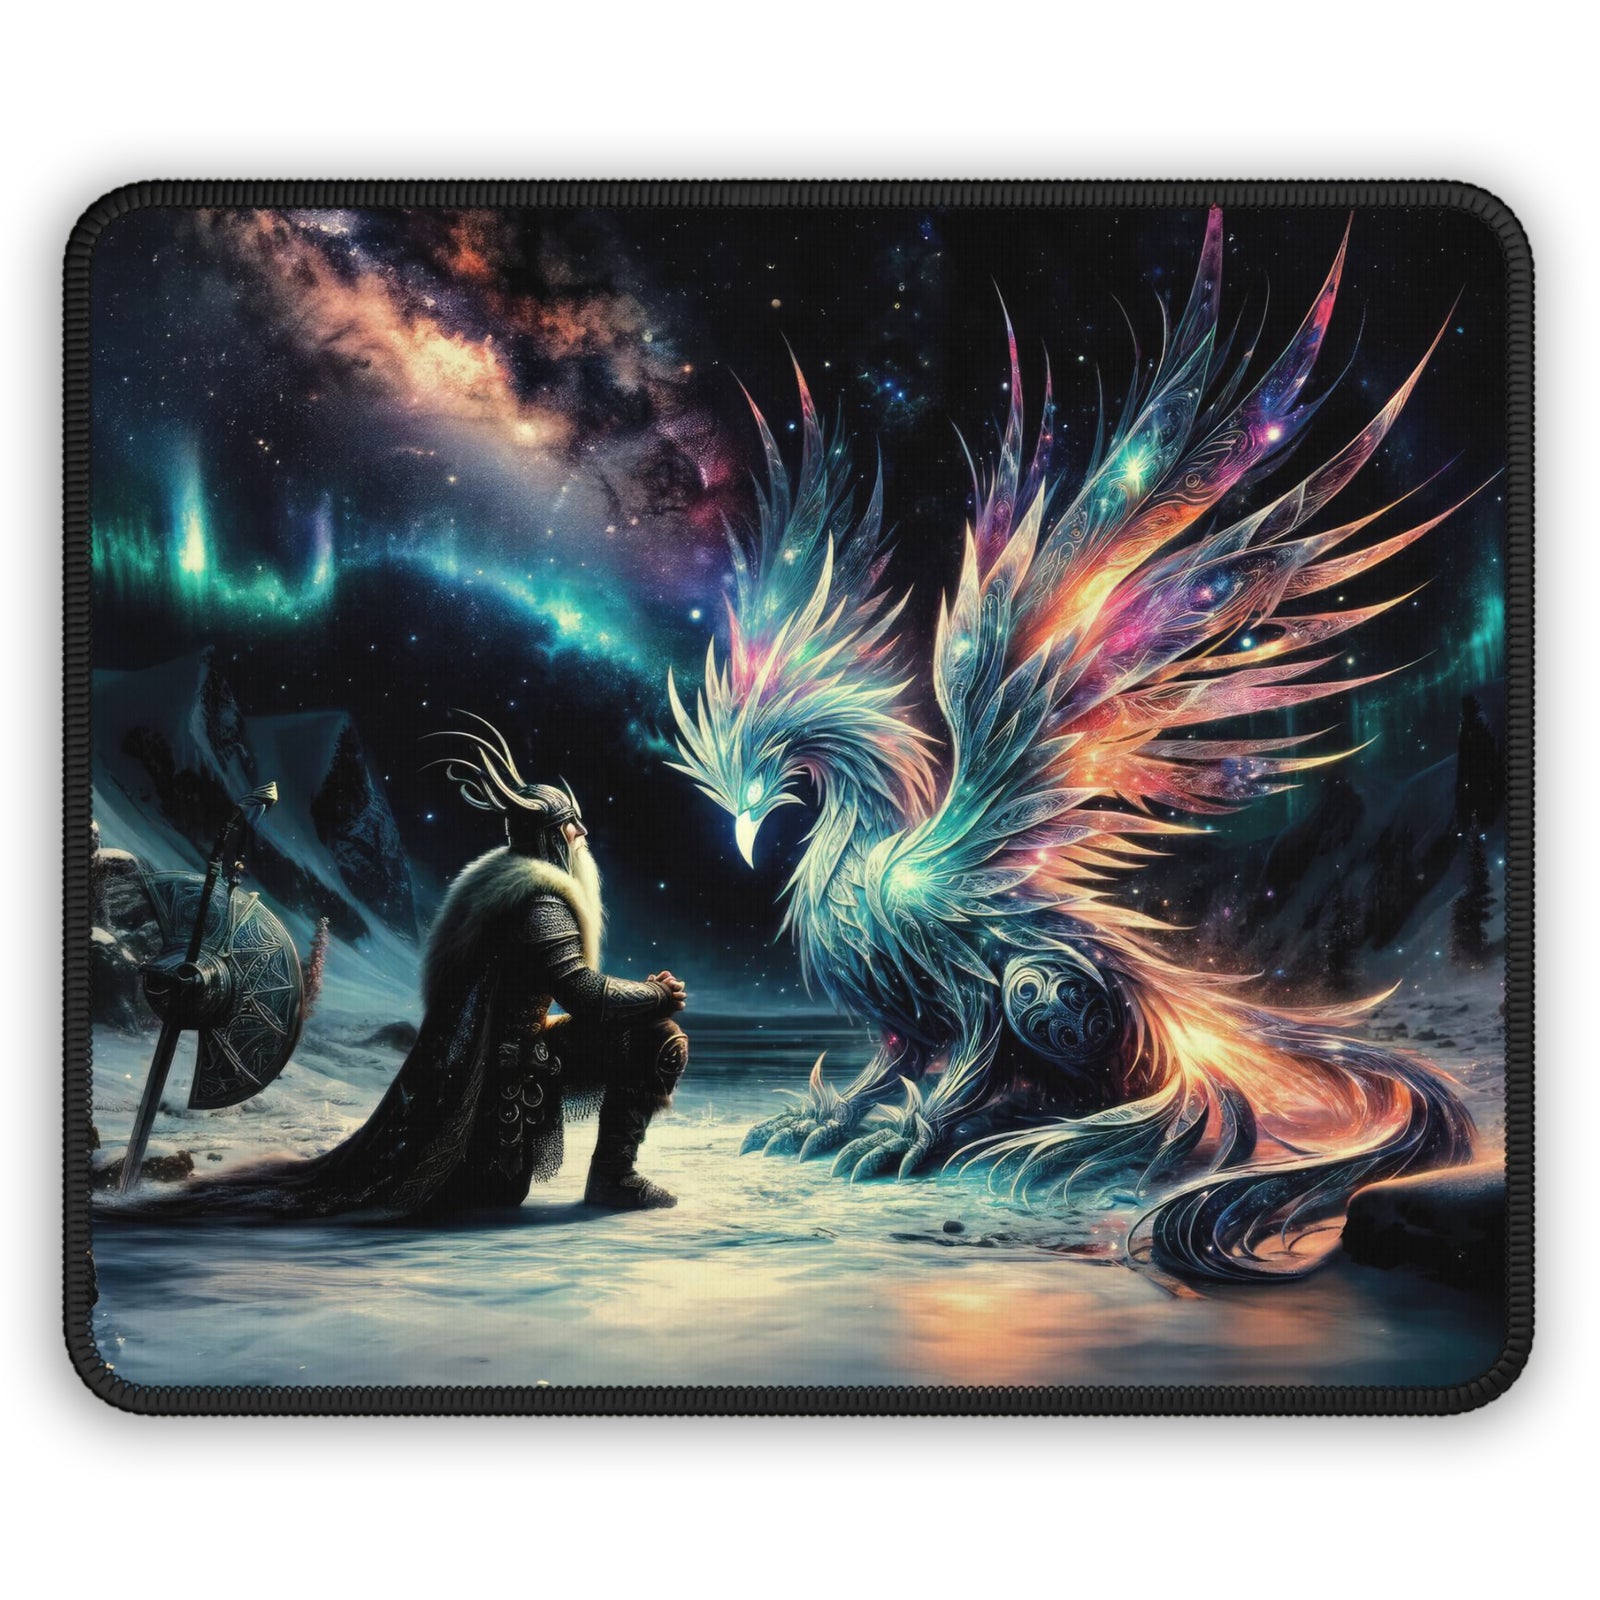 The Mythic Encounter Gaming Mouse Pad